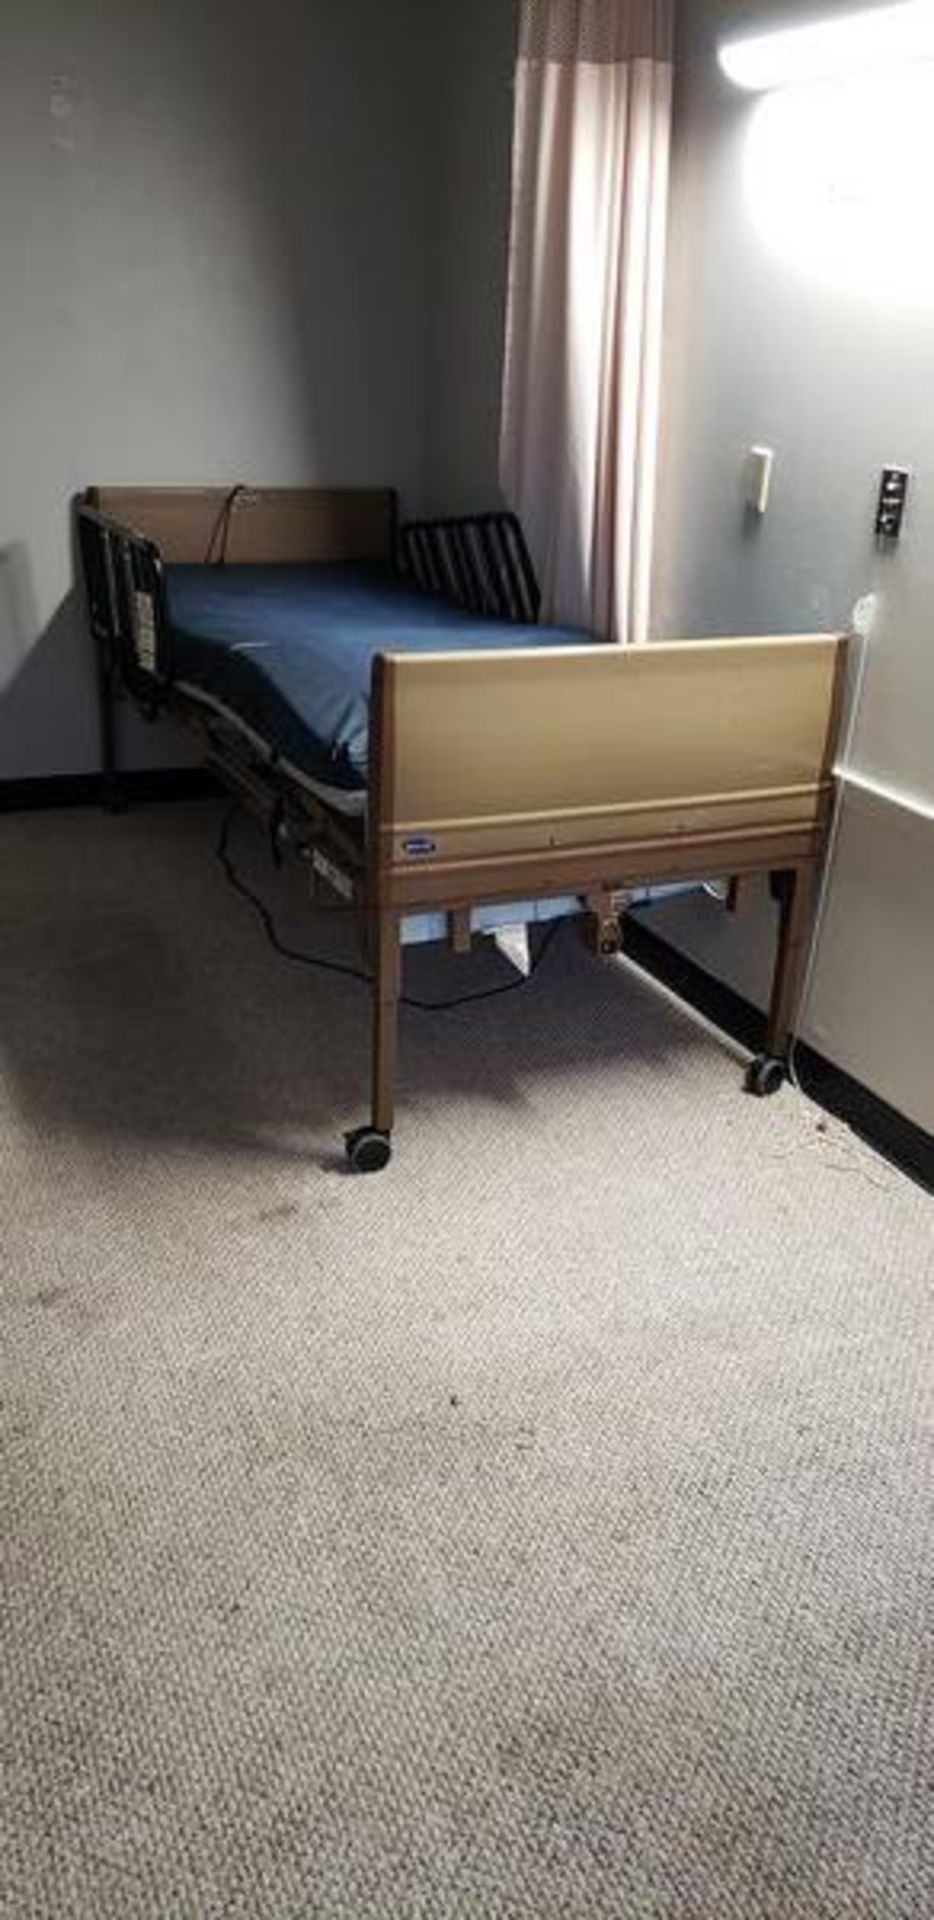 INVACARE HOSPITAL BED MODEL 54901VC - Image 2 of 3